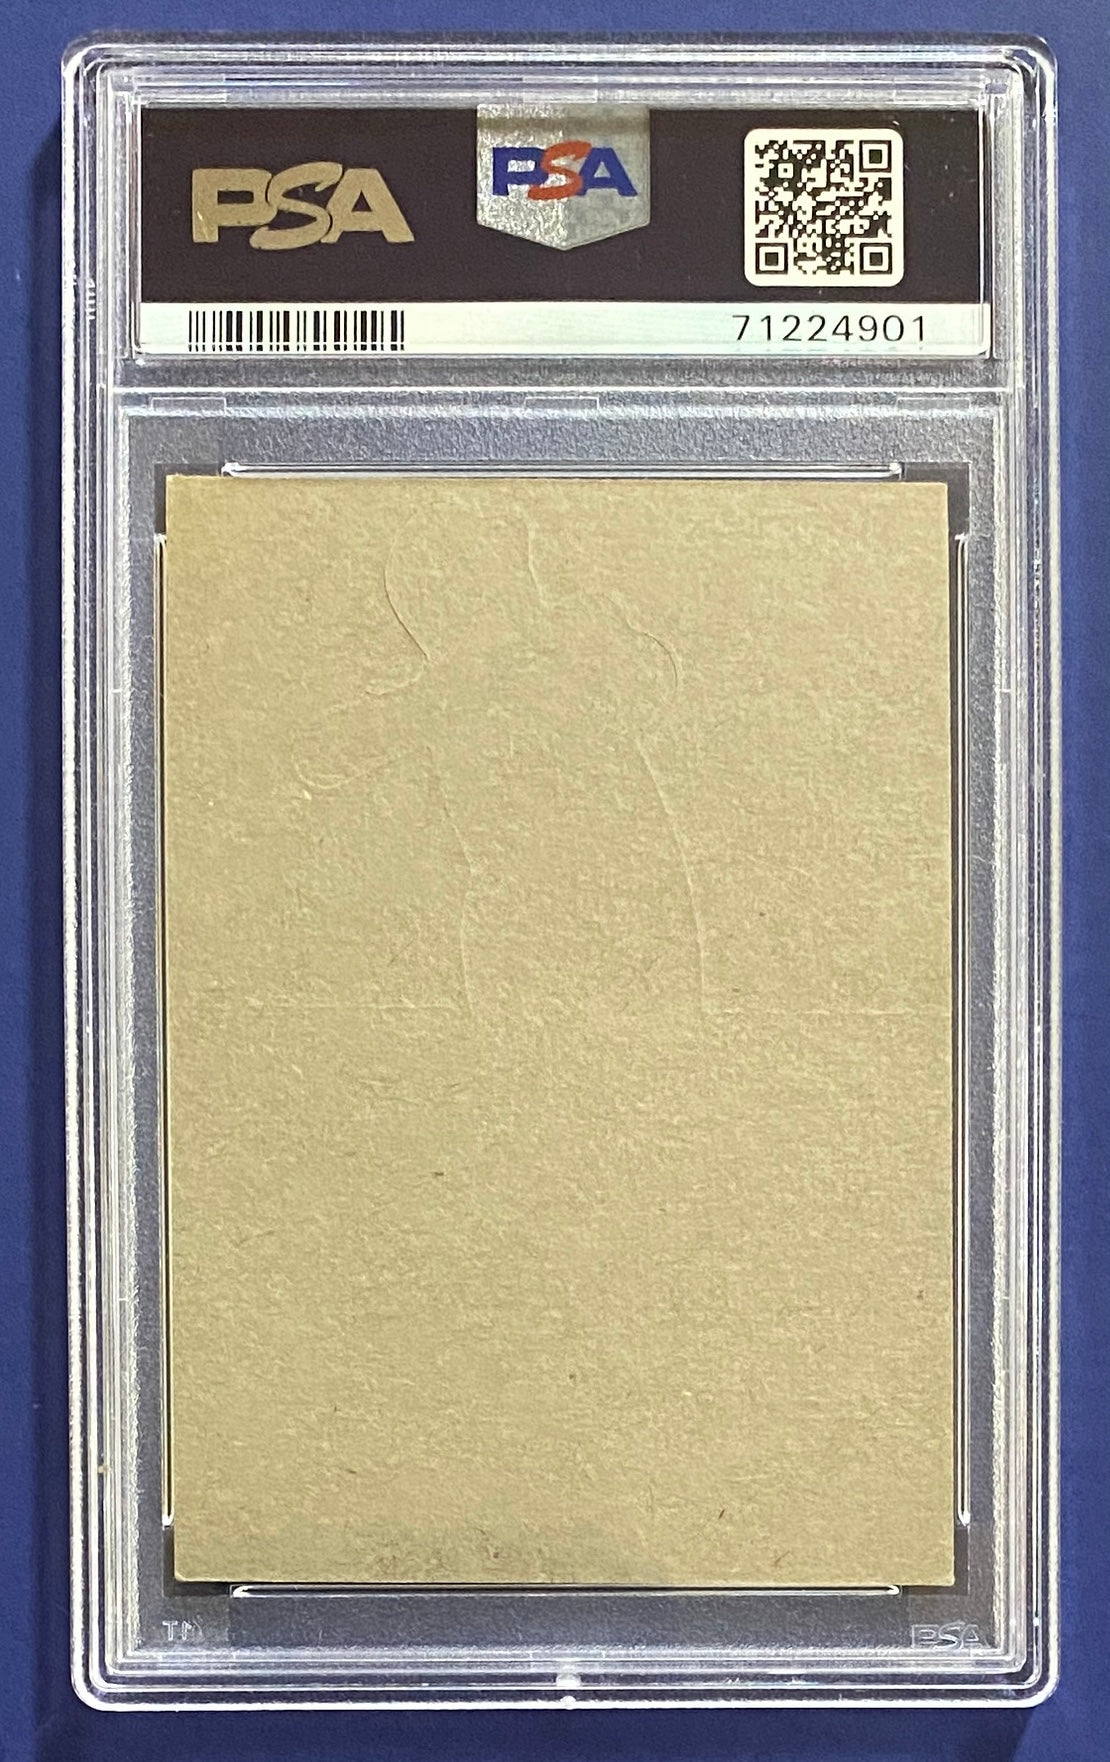 Mickey Mantle 1964 Topps Stand-Up PSA 5